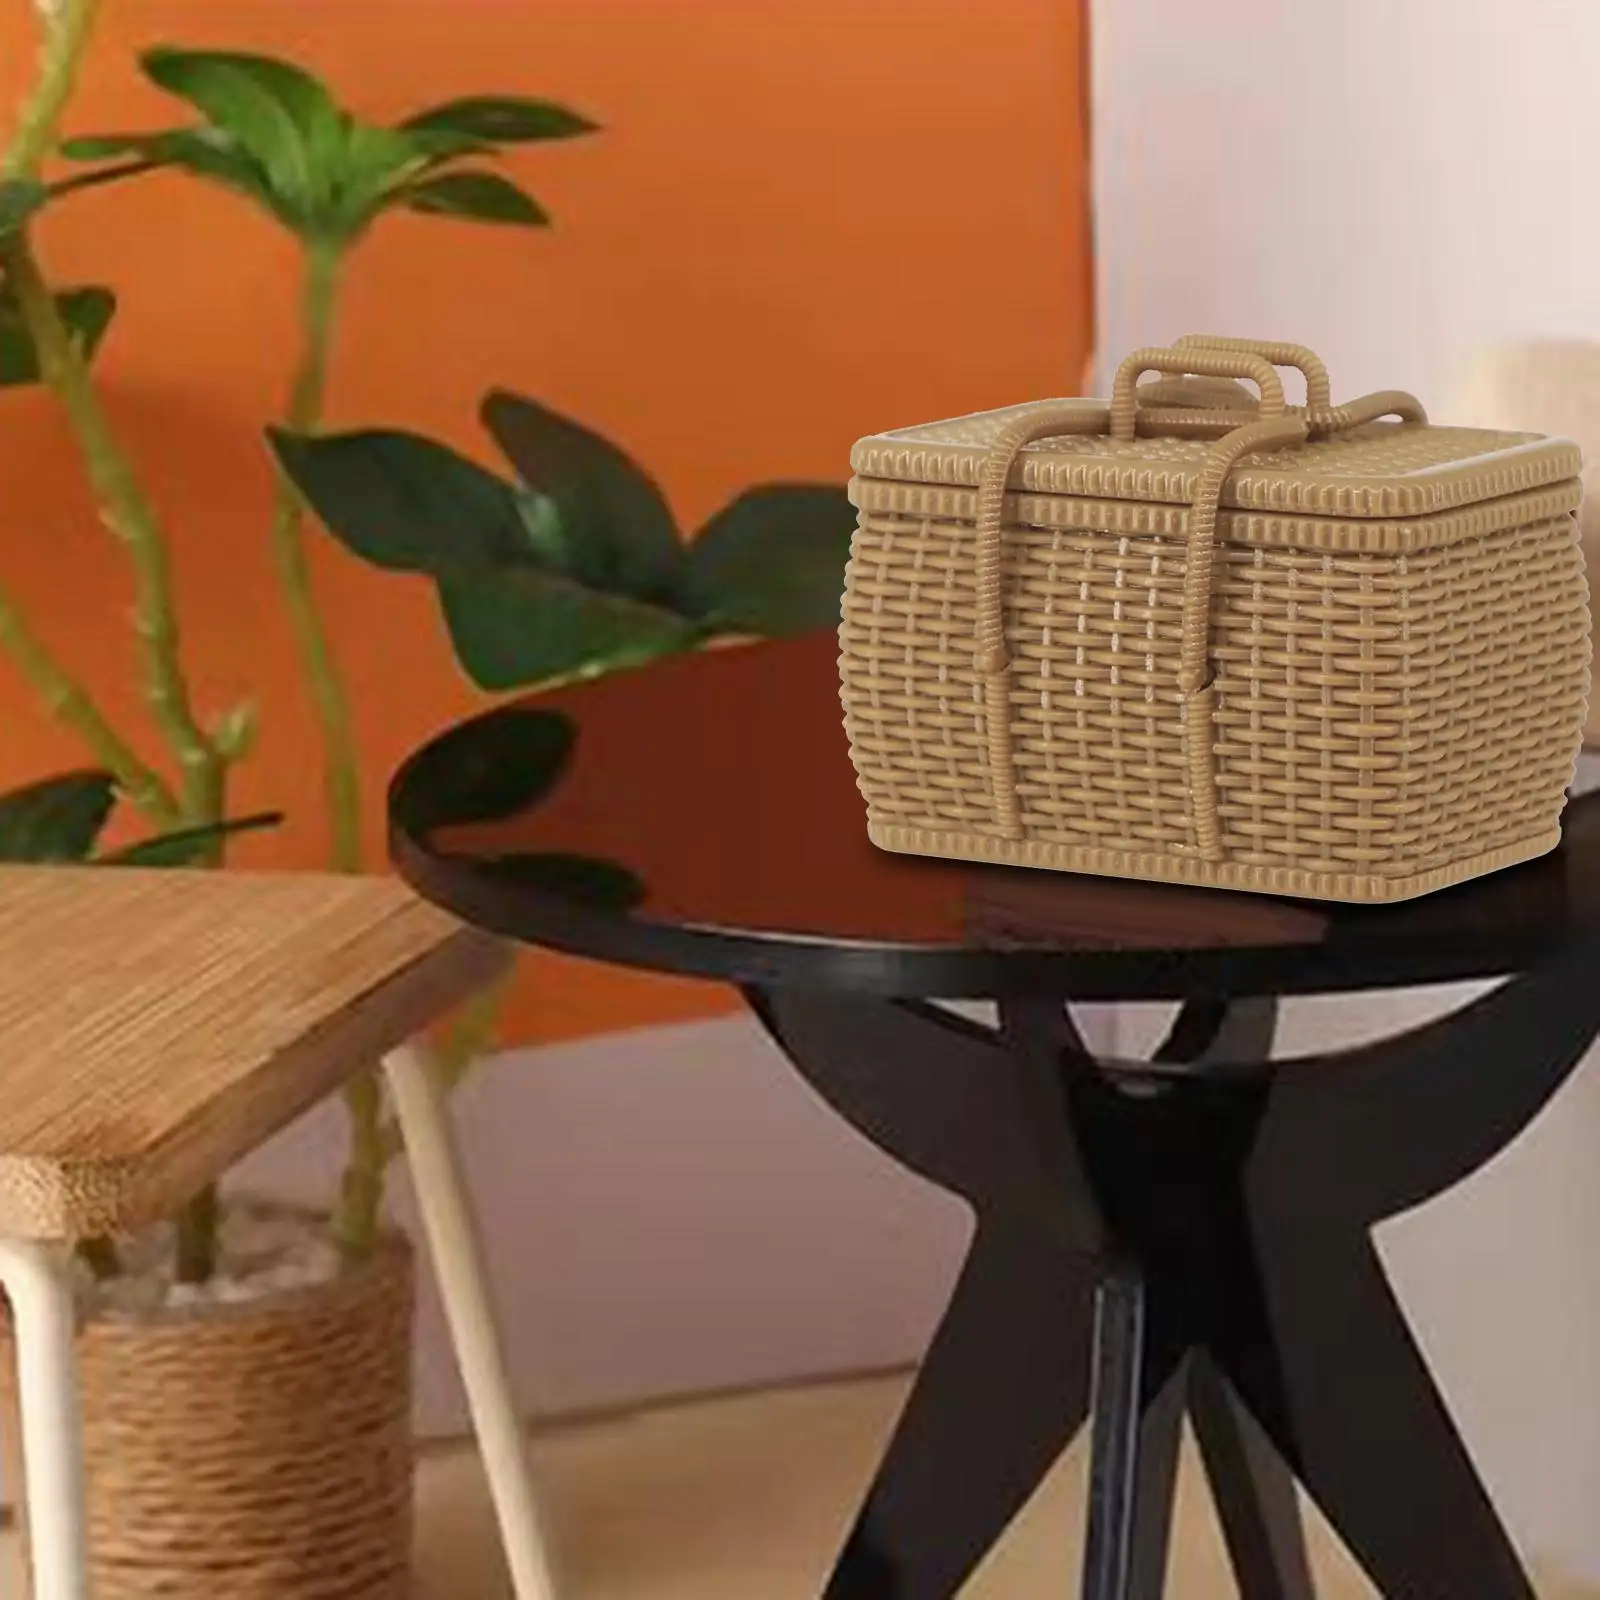 1/6 Doll House Basket Furniture Model Realistic Miniature Woven Basket for DIY Scenery Action Figures Accs